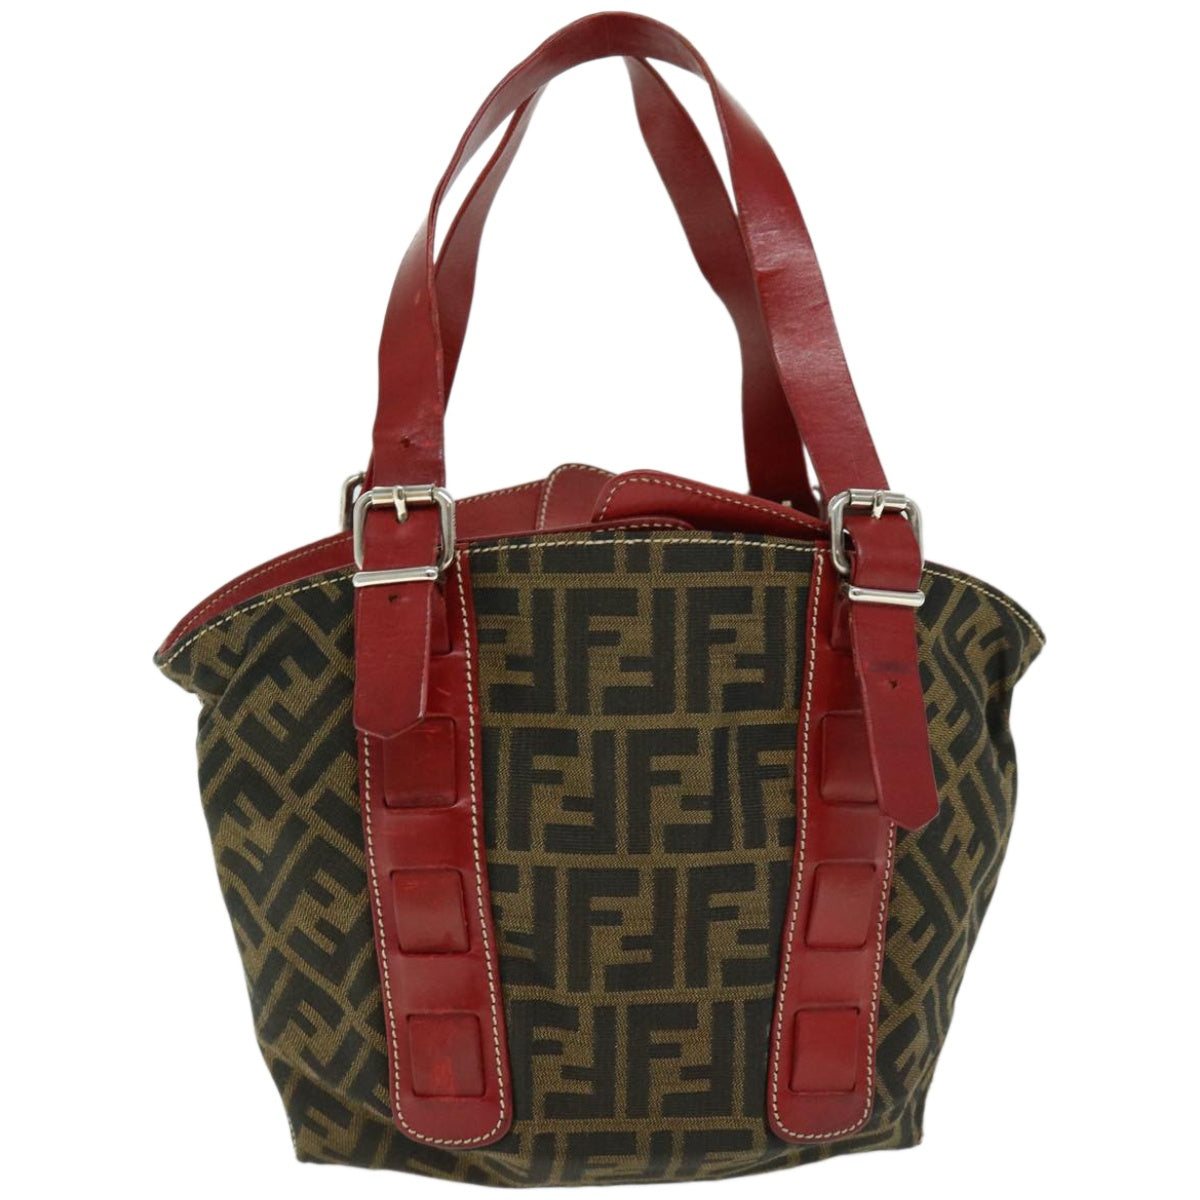 FENDI Zucca Canvas Hand Bag Brown Red Auth 66308